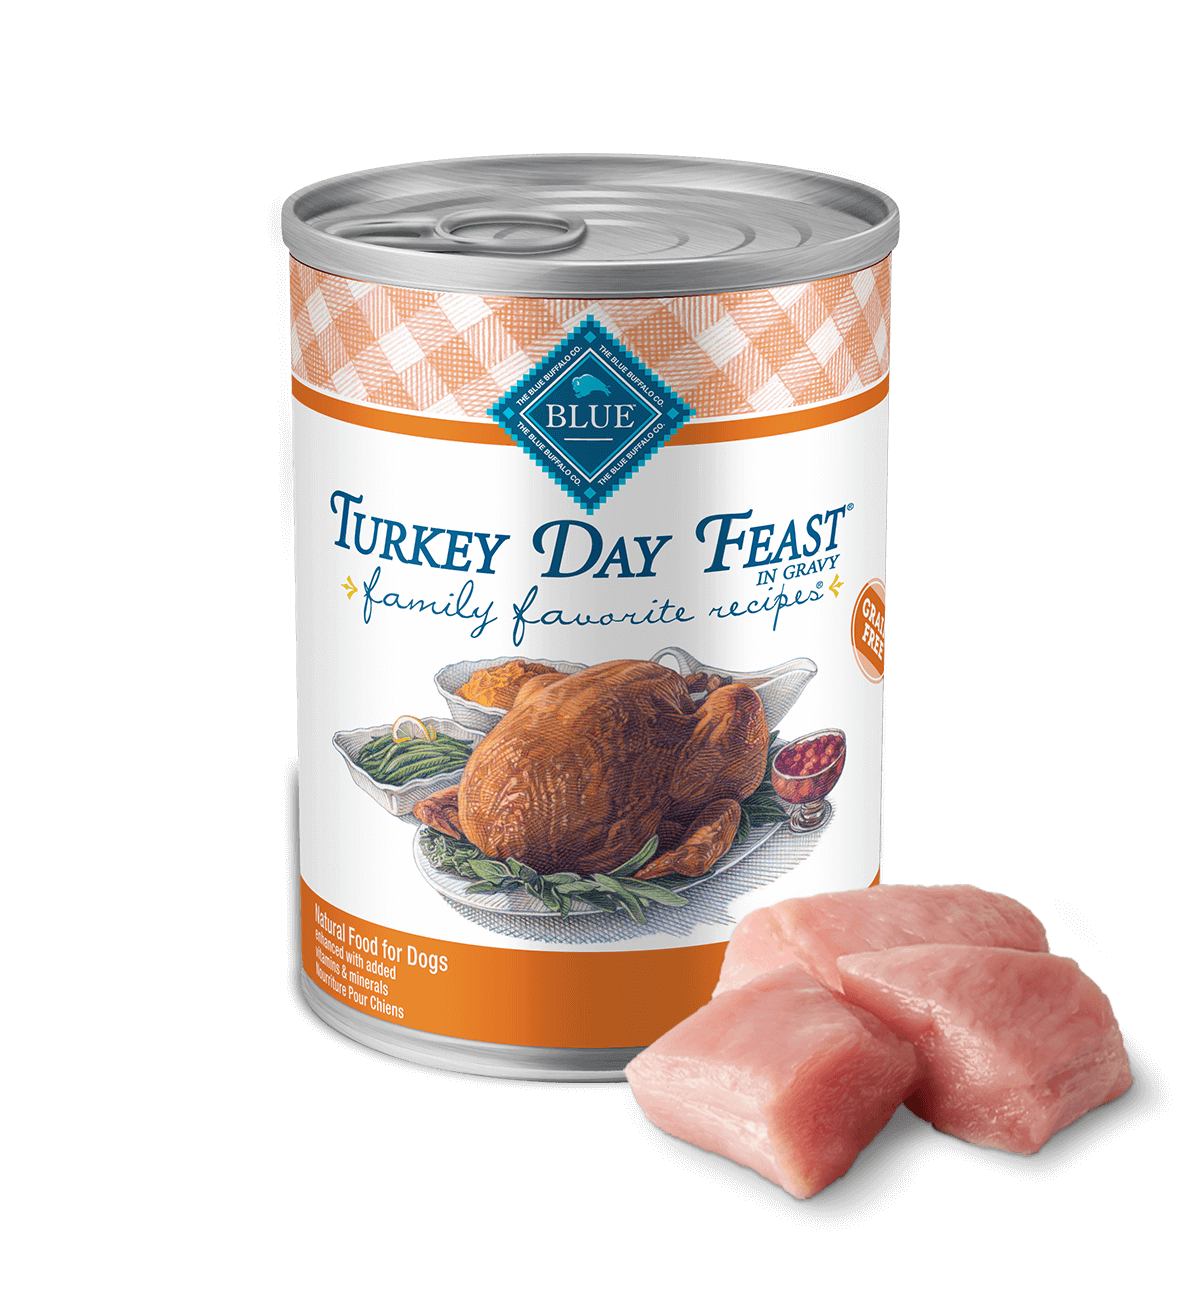 blue family favorite recipes turkey day feast dog wet food